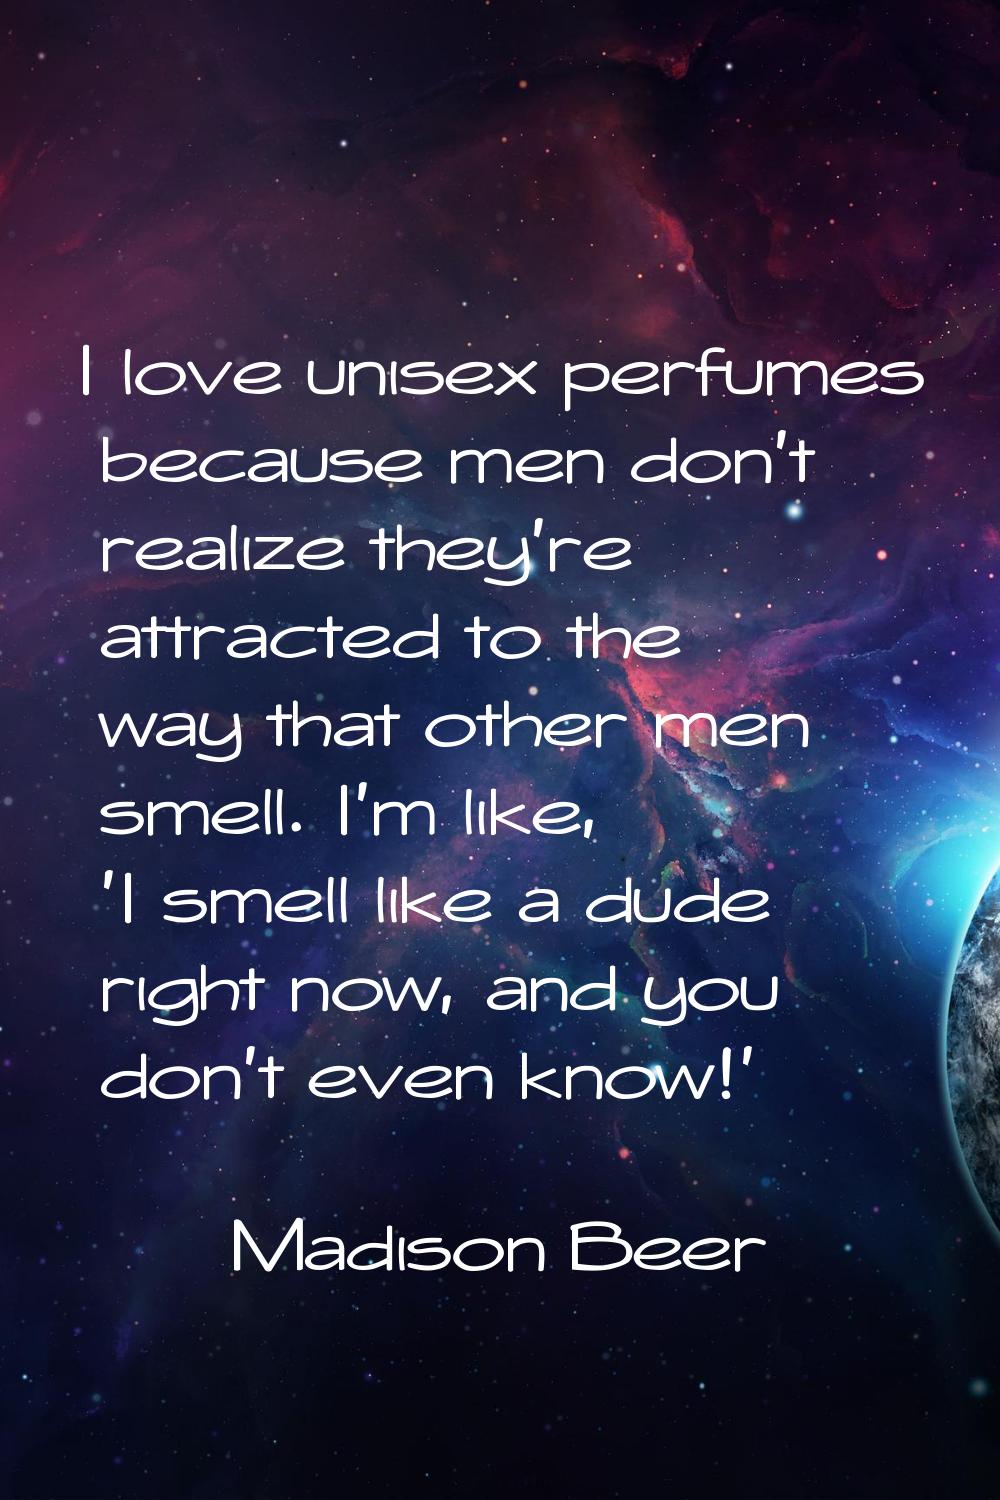 I love unisex perfumes because men don't realize they're attracted to the way that other men smell.